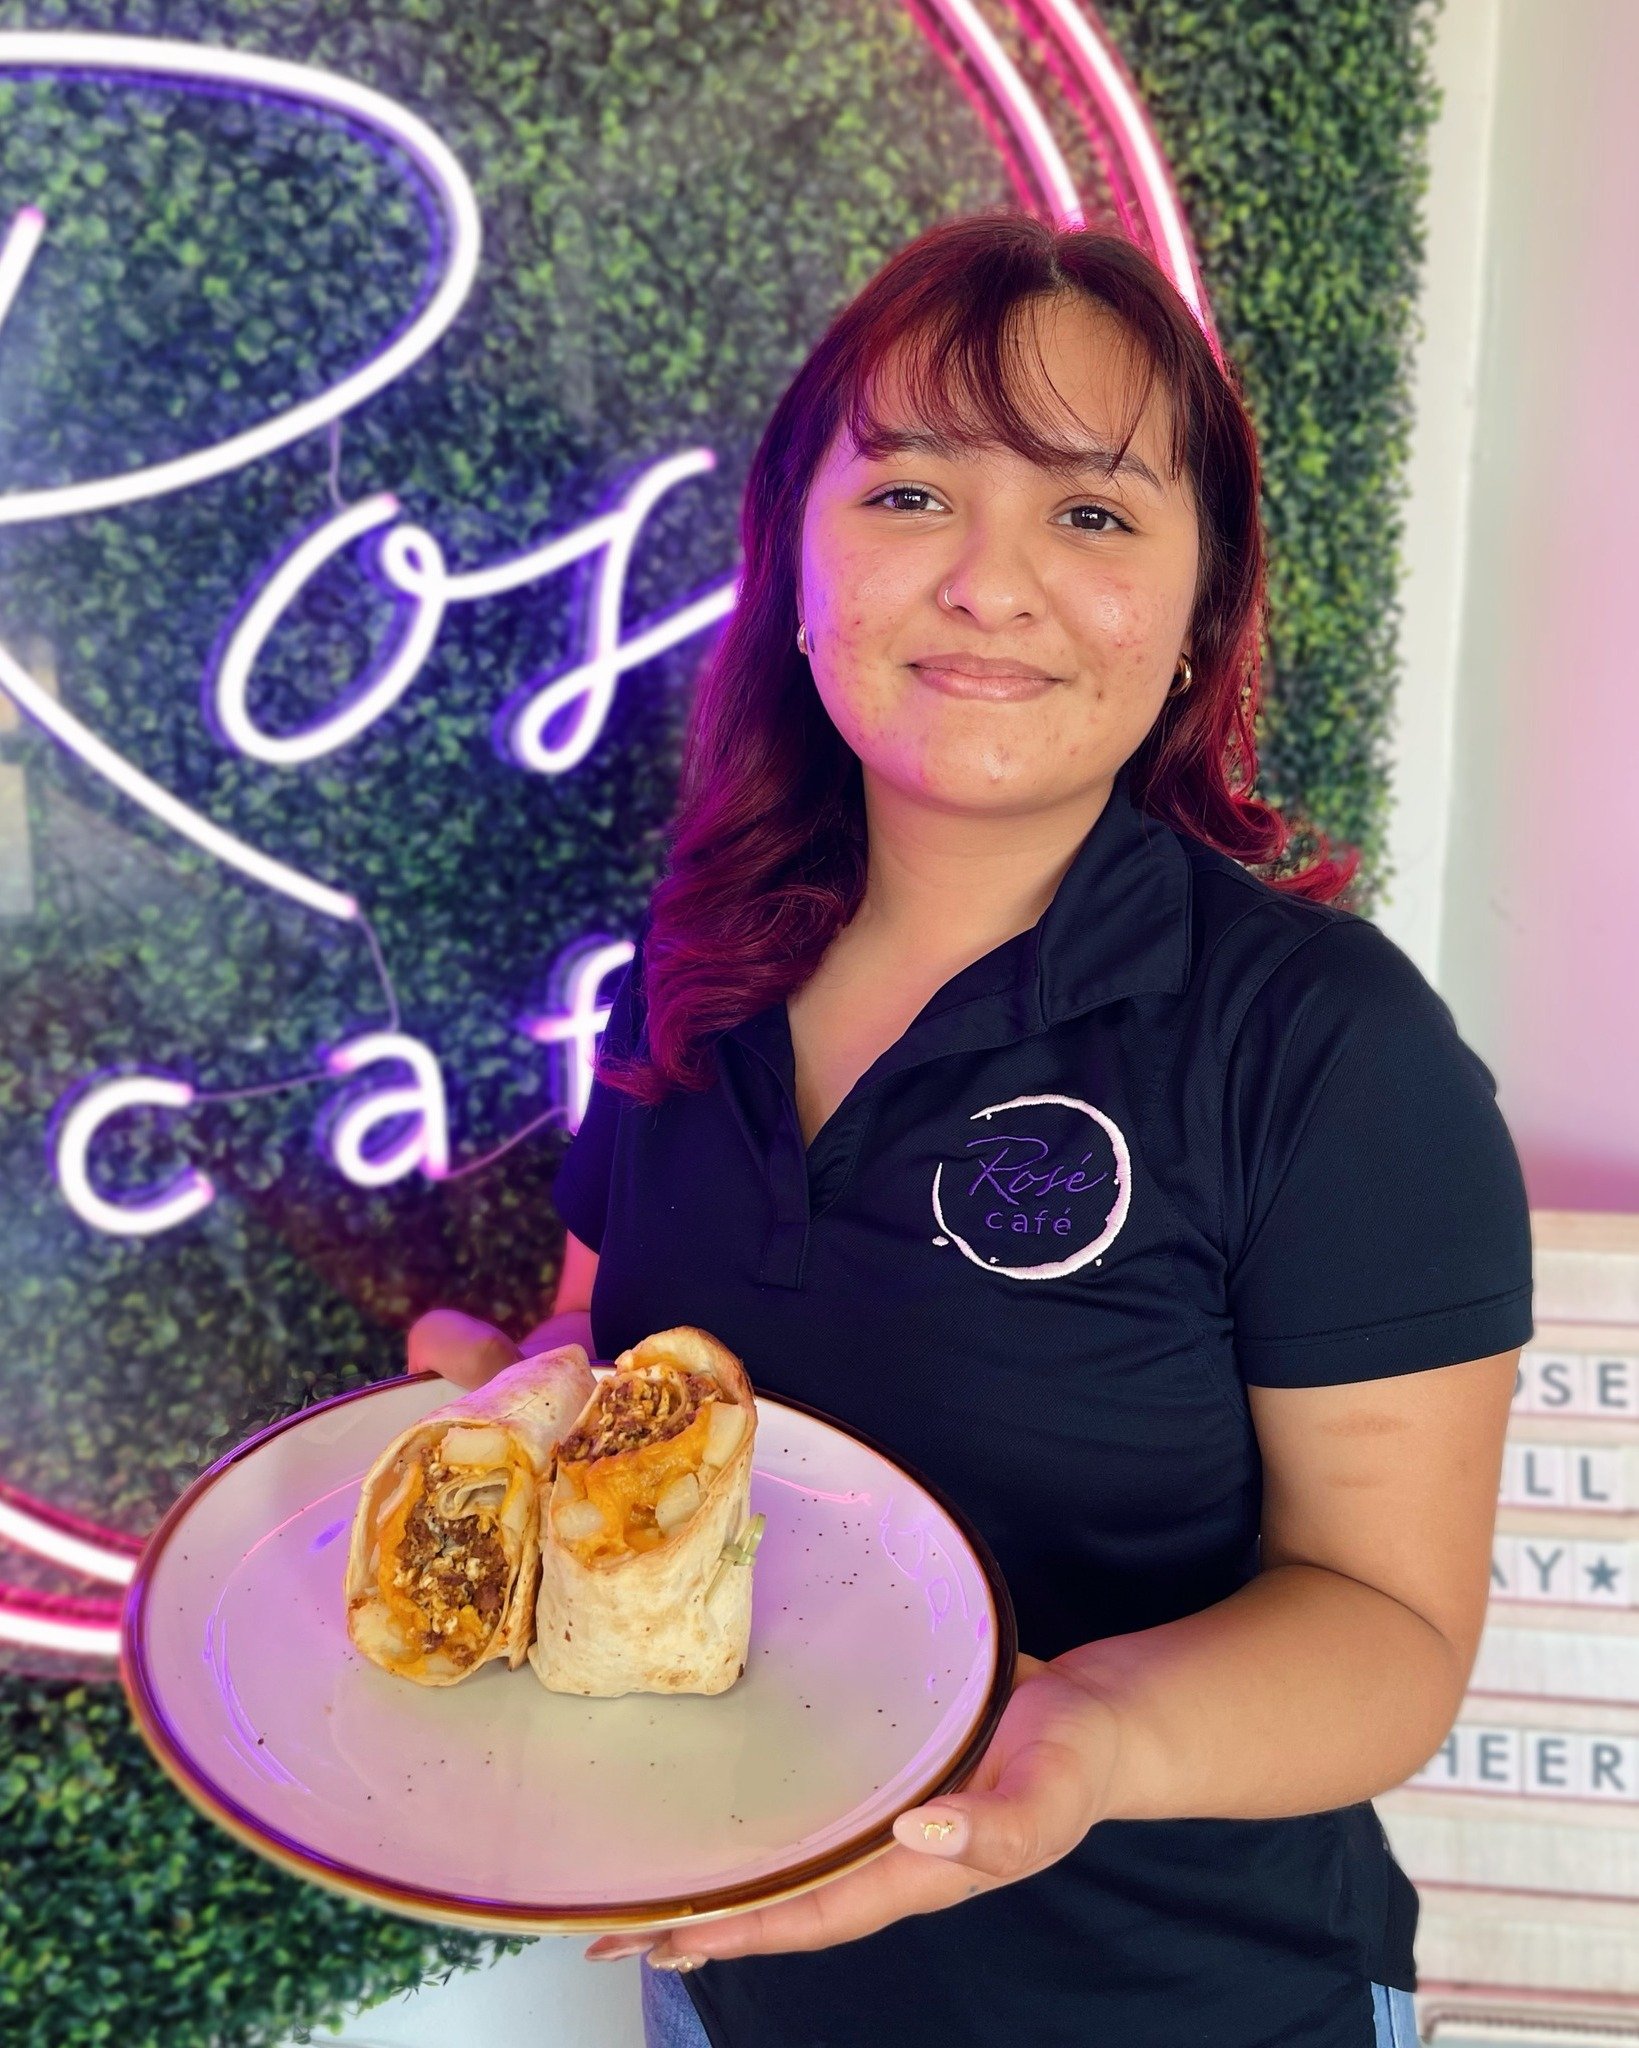 In our ongoing friendly competition among employees, this marks the fifth week! Each employee takes turns presenting a &quot;Food Special&quot; to feature for a week.

This week's special is courtesy of Sammy, a team member:

Chorizo Breakfast Burrit